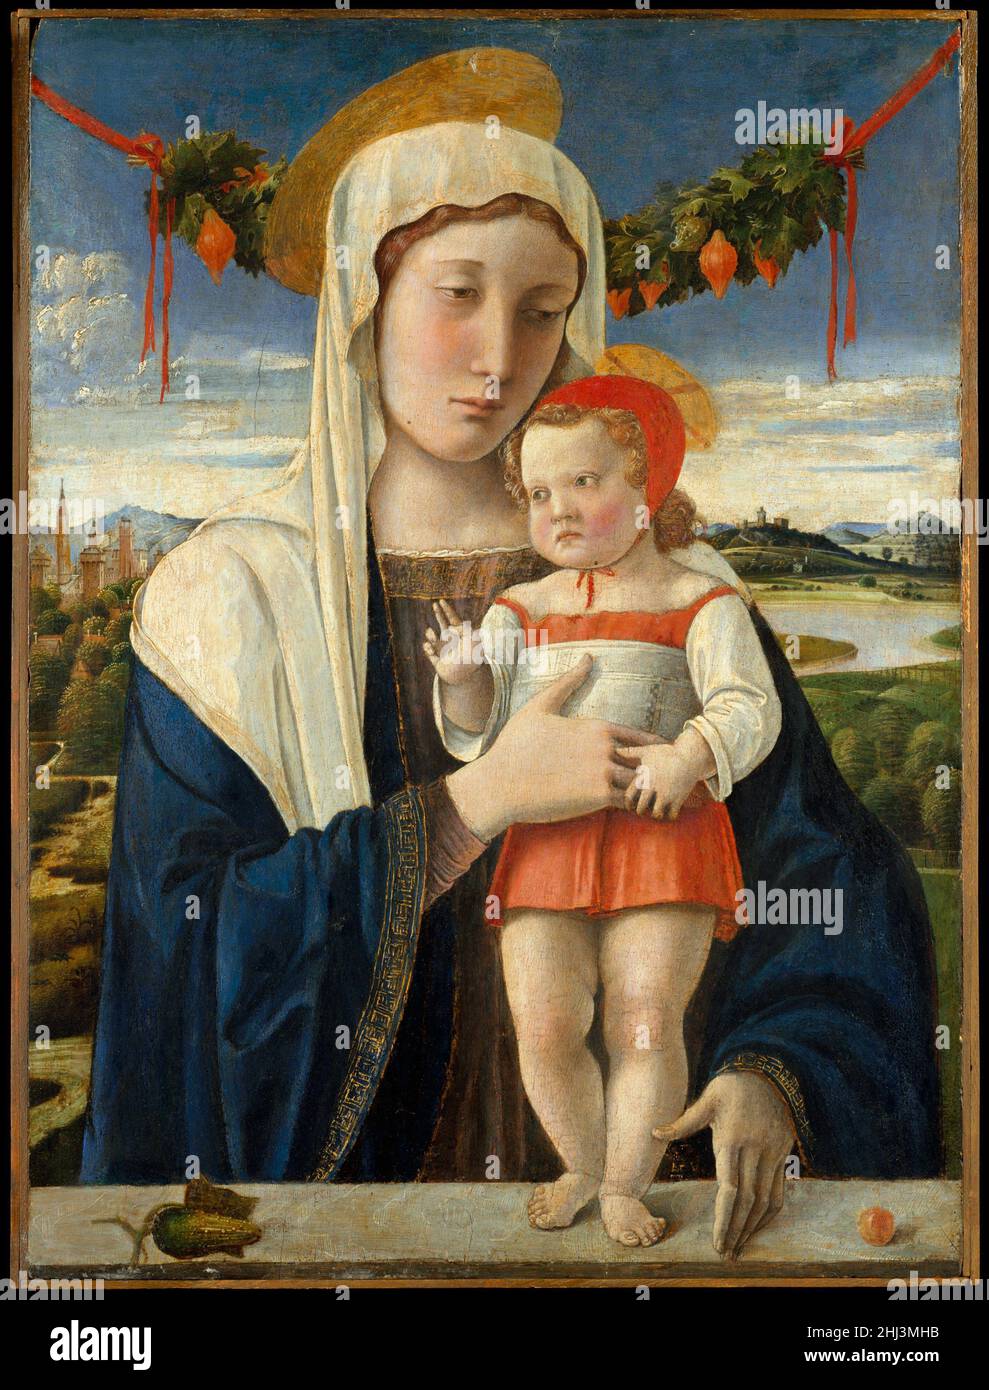 Madonna and Child ca. 1470 Giovanni Bellini Italian This early work by the Venetian painter, Giovanni Bellini, reveals the profound influence of his brother-in-law, the Paduan master Andrea Mantegna, both in the figure types and the inclusion of the garland. The treatment of the landscape and the use of the oil medium, with which Giovanni may have been experimenting since the 1460s, were likely inspired by Netherlandish painting. Bellini creates a dramatic connection between the worshipper and subject through the Virgin’s left hand, extending across the parapet, and her fingertip, which reache Stock Photo